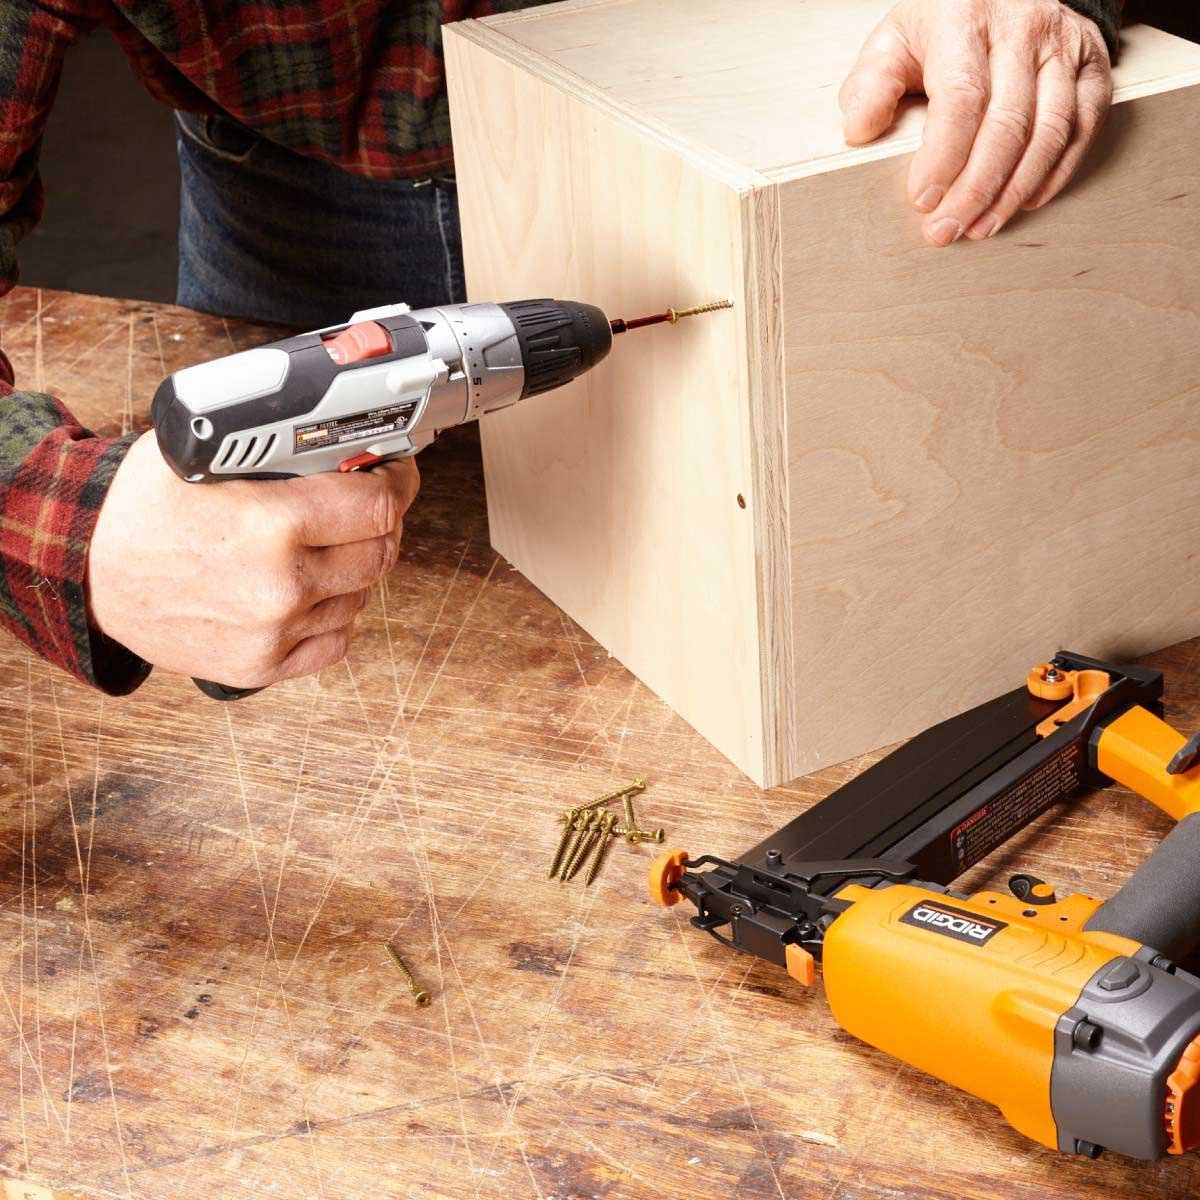 How to choose a Finish Nailer